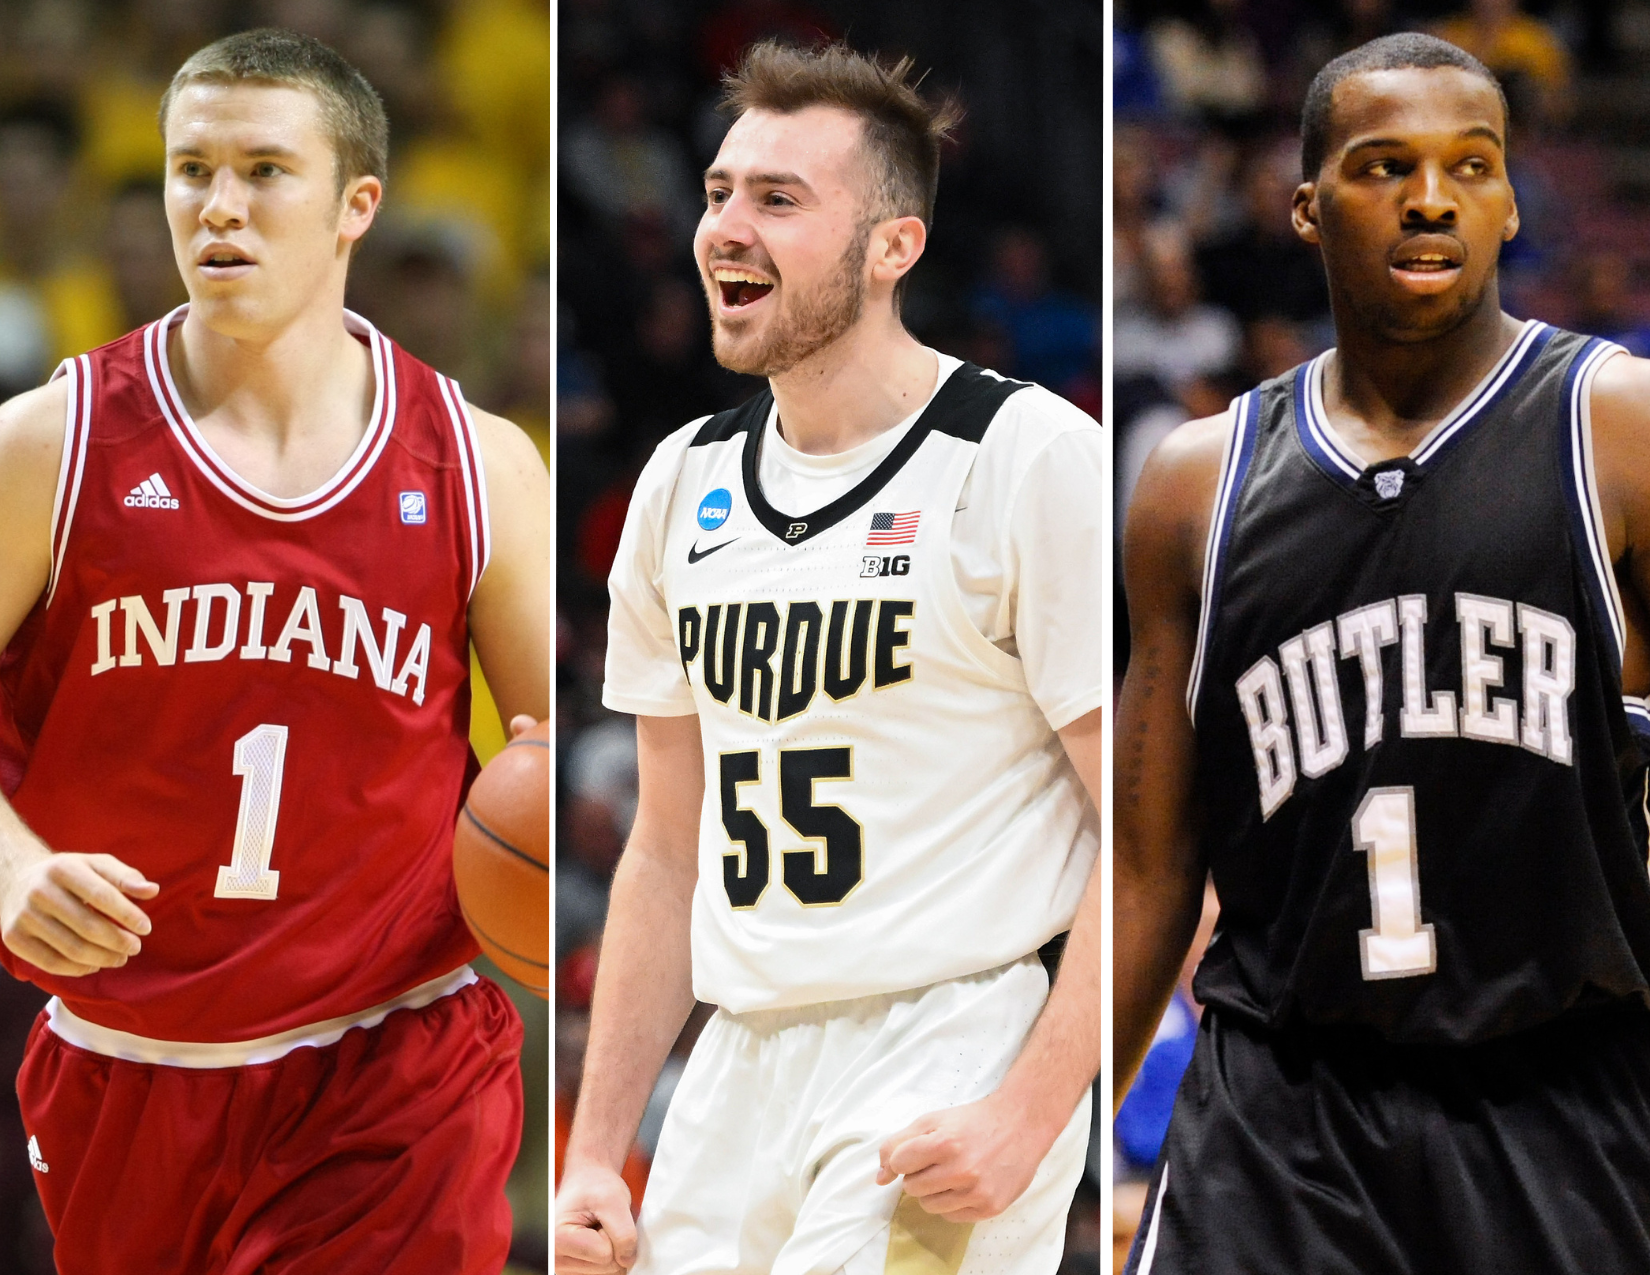 TBT at Hinkle Fieldhouse: Rosters, schedule as IU, Purdue, Butler alumni compete